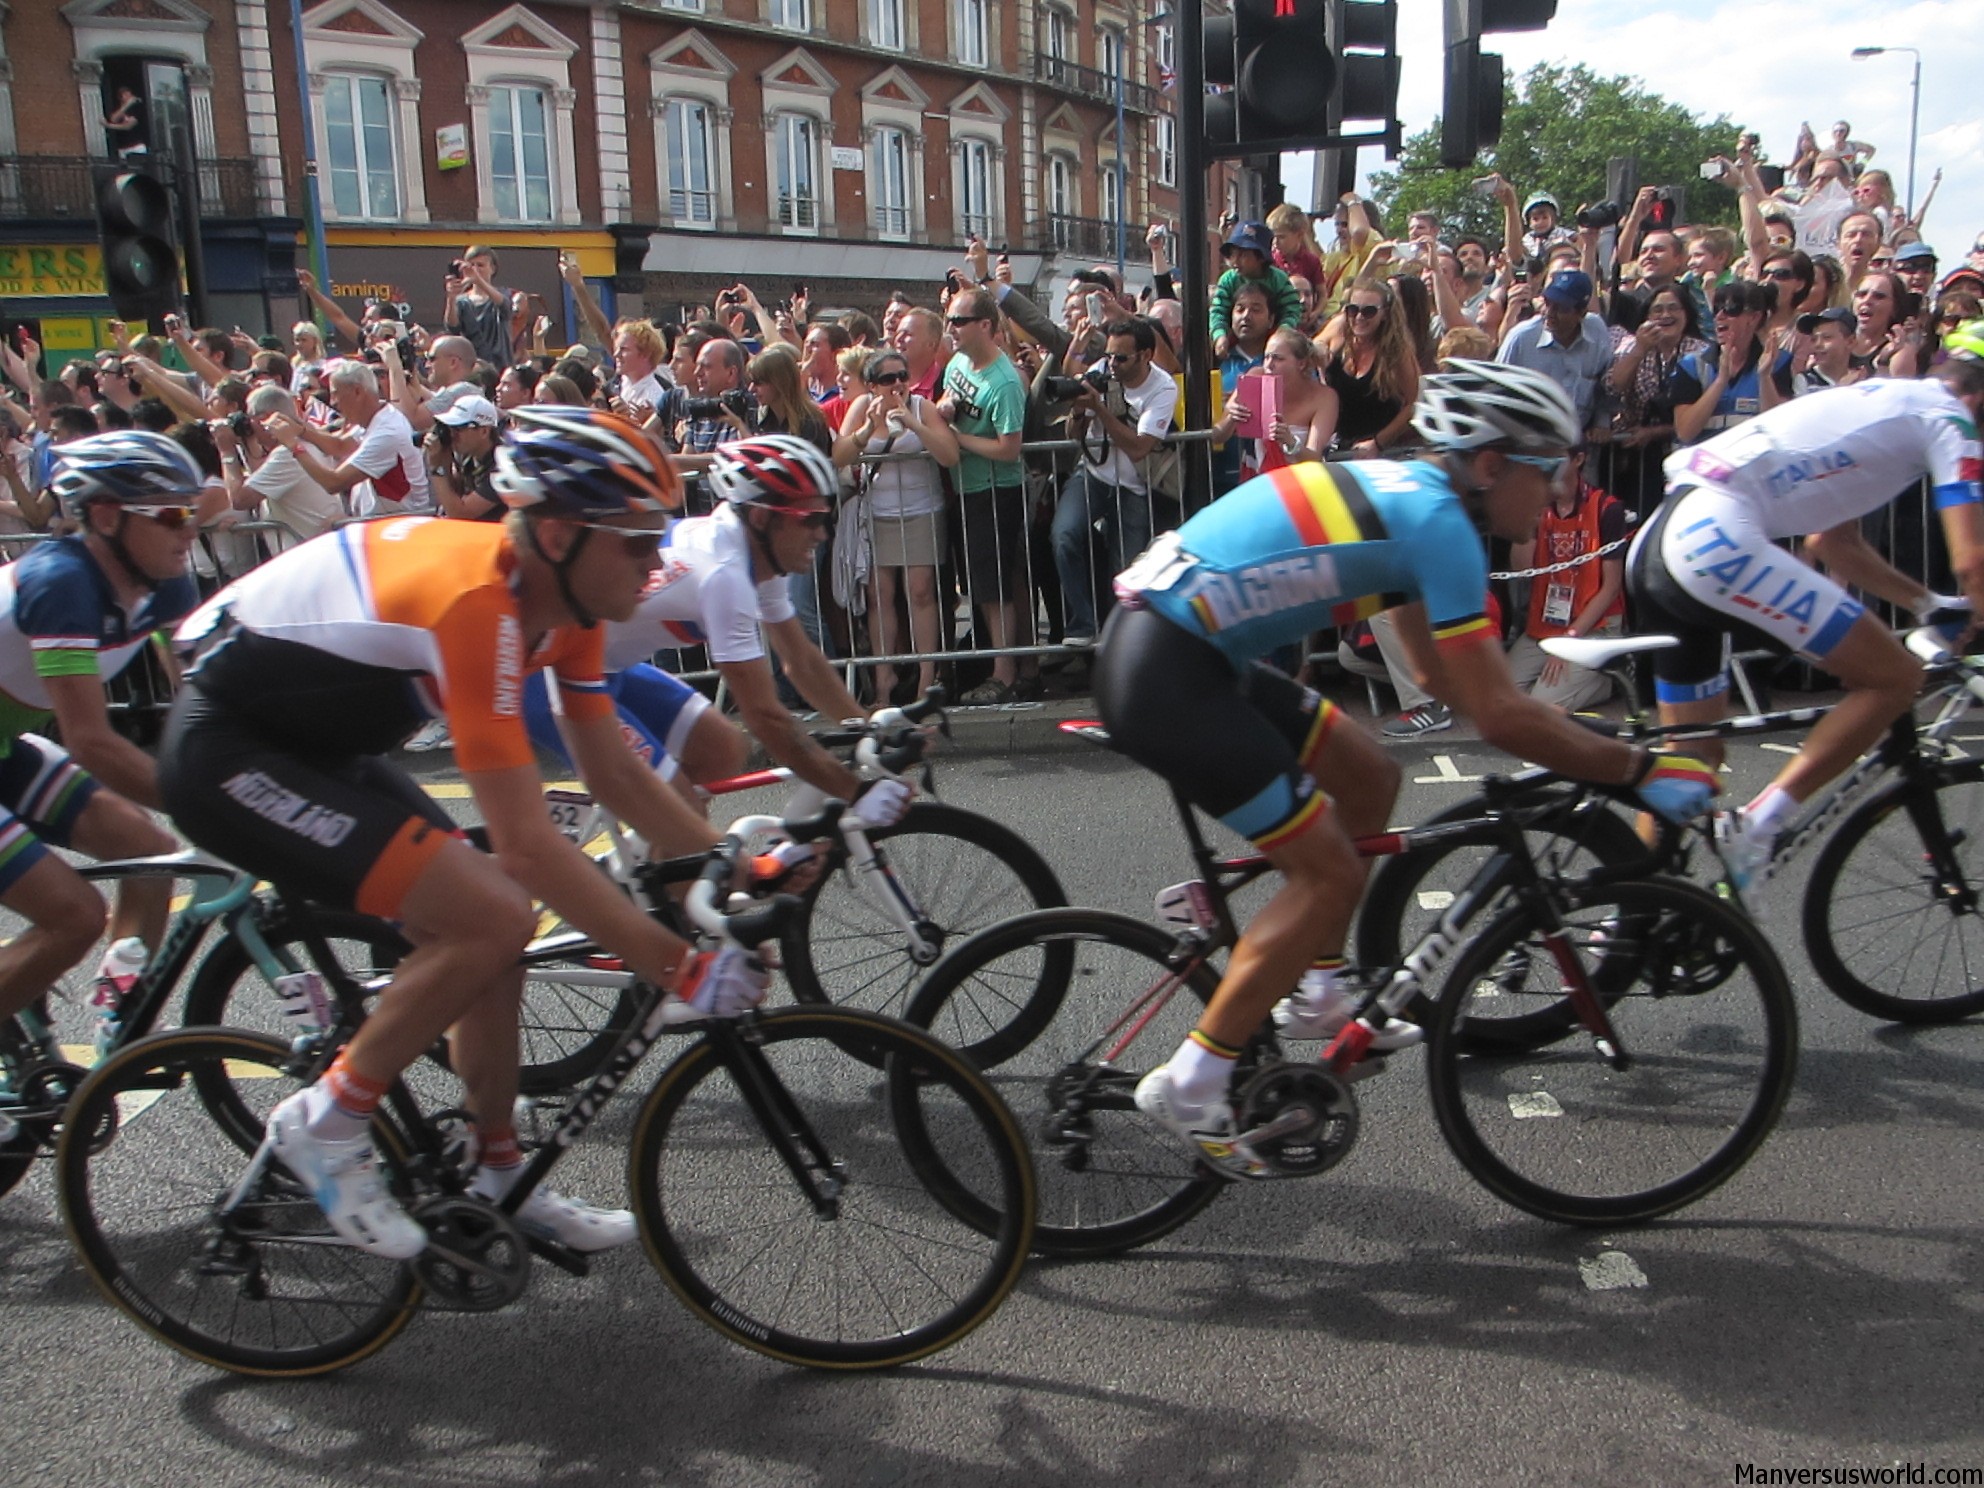 The London 2012 Olympics road race from Putney